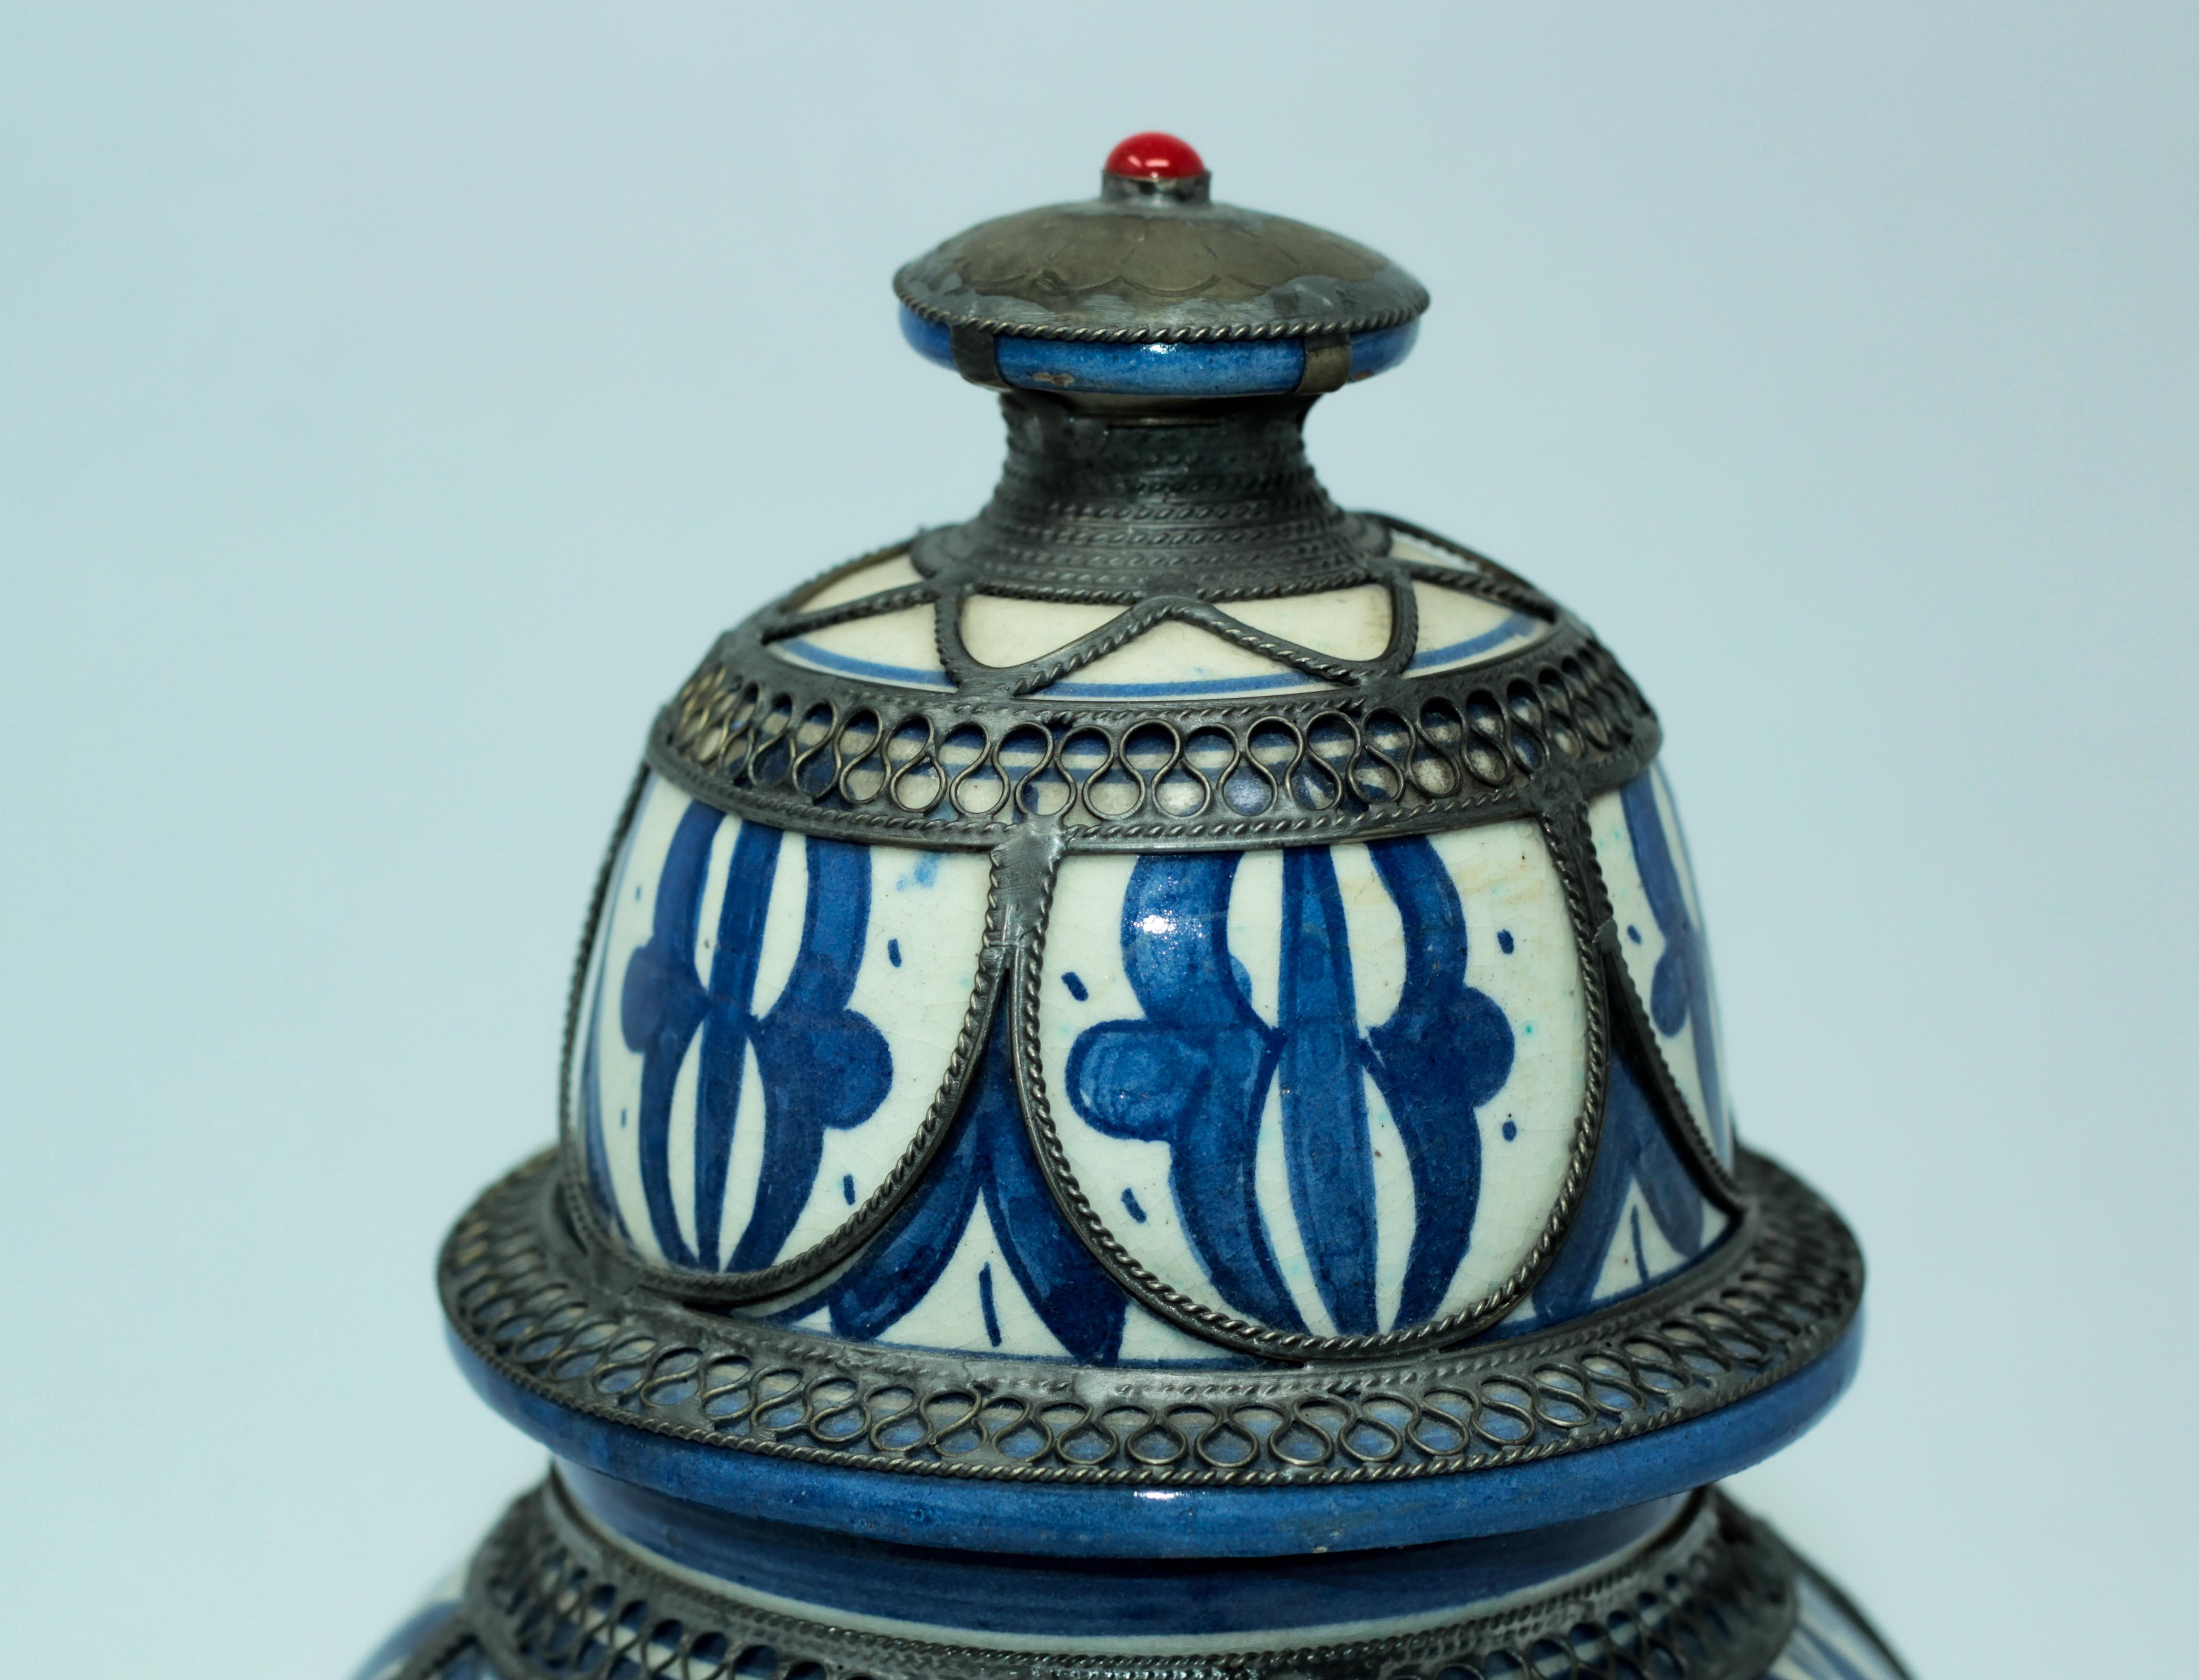 Fabulous handcrafted antique Moroccan ceramic vase in Moorish style adorned with Fine filigree silver nickel work overlaid.
The color of the ceramic is renowned as bleu de Fez.
Blue and white ceramic vase with silver filigree.
Dimensions: 11